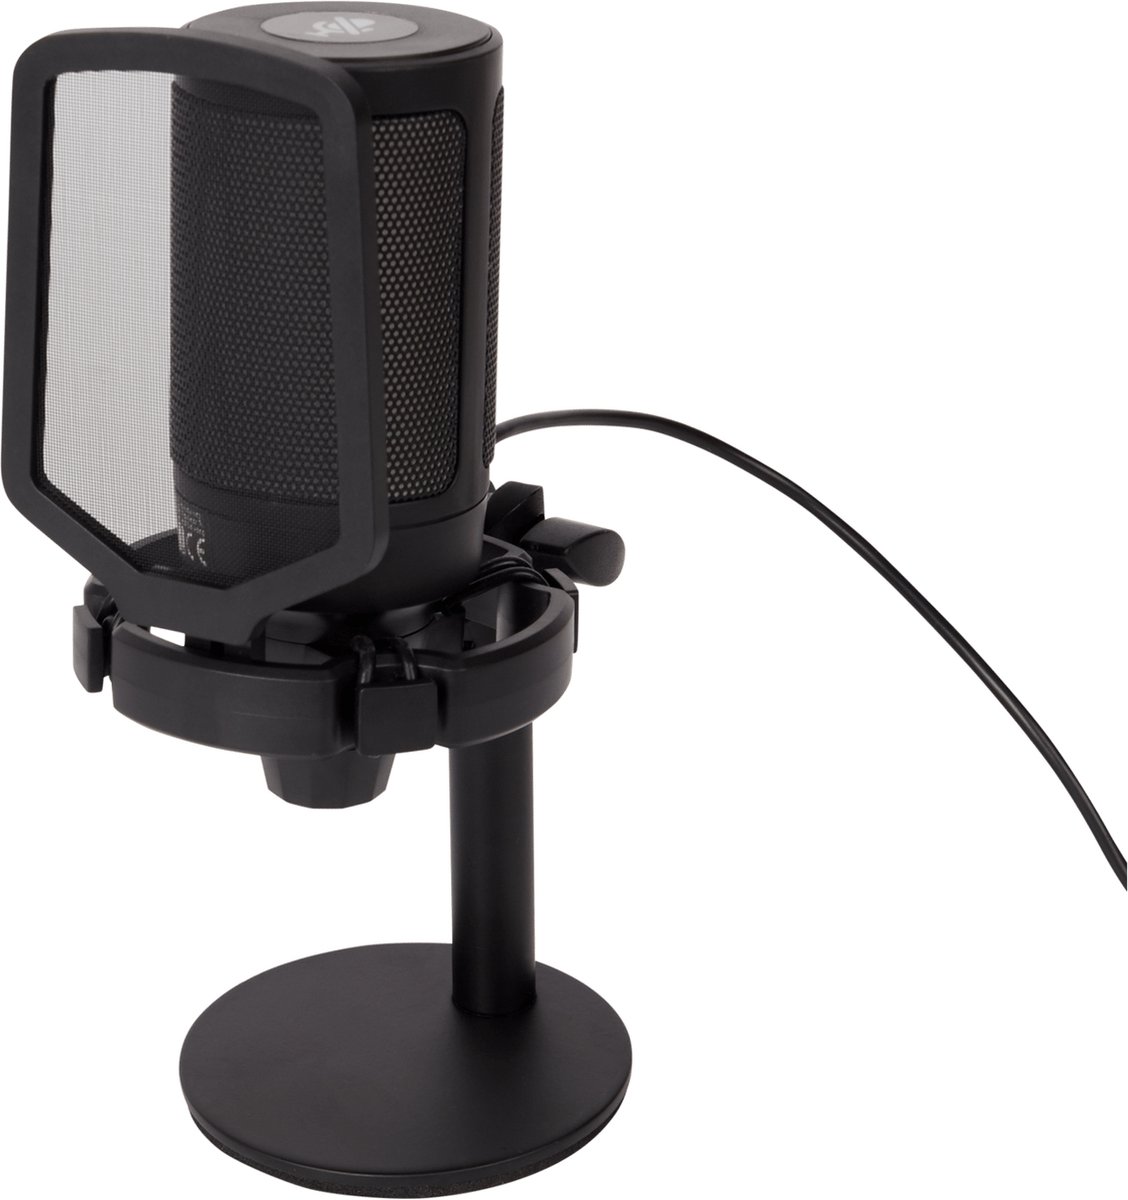 S&C - microfoon mic computer podcast cadeautip cadeau youtube streaming